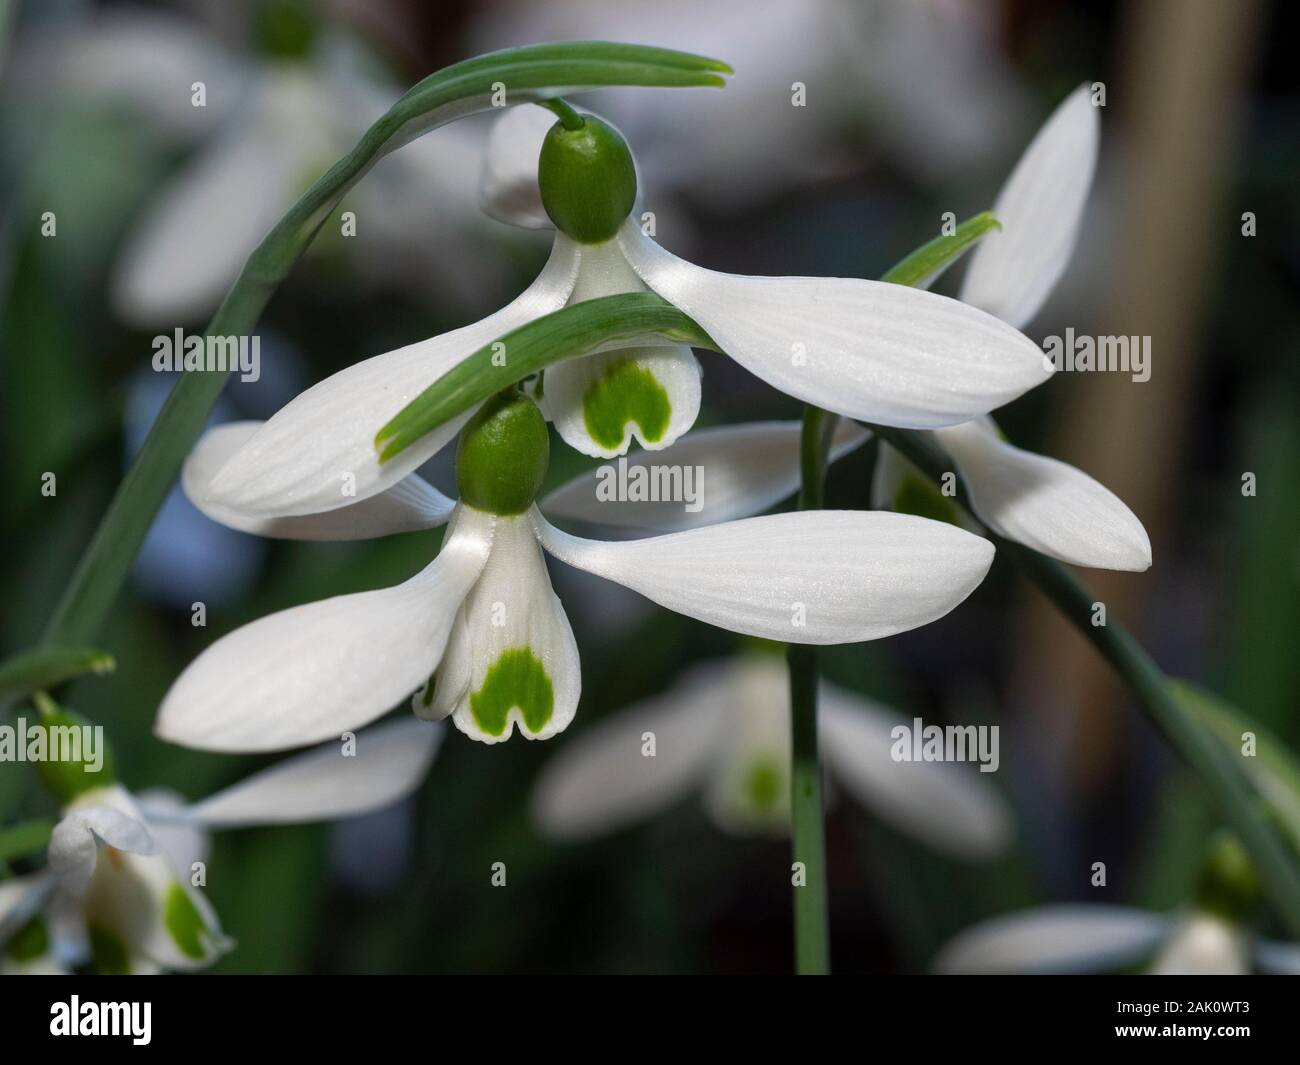 Green marked flowers of the winter blooming hardy snowdrop, Galanthus 'Atkinsii' Stock Photo